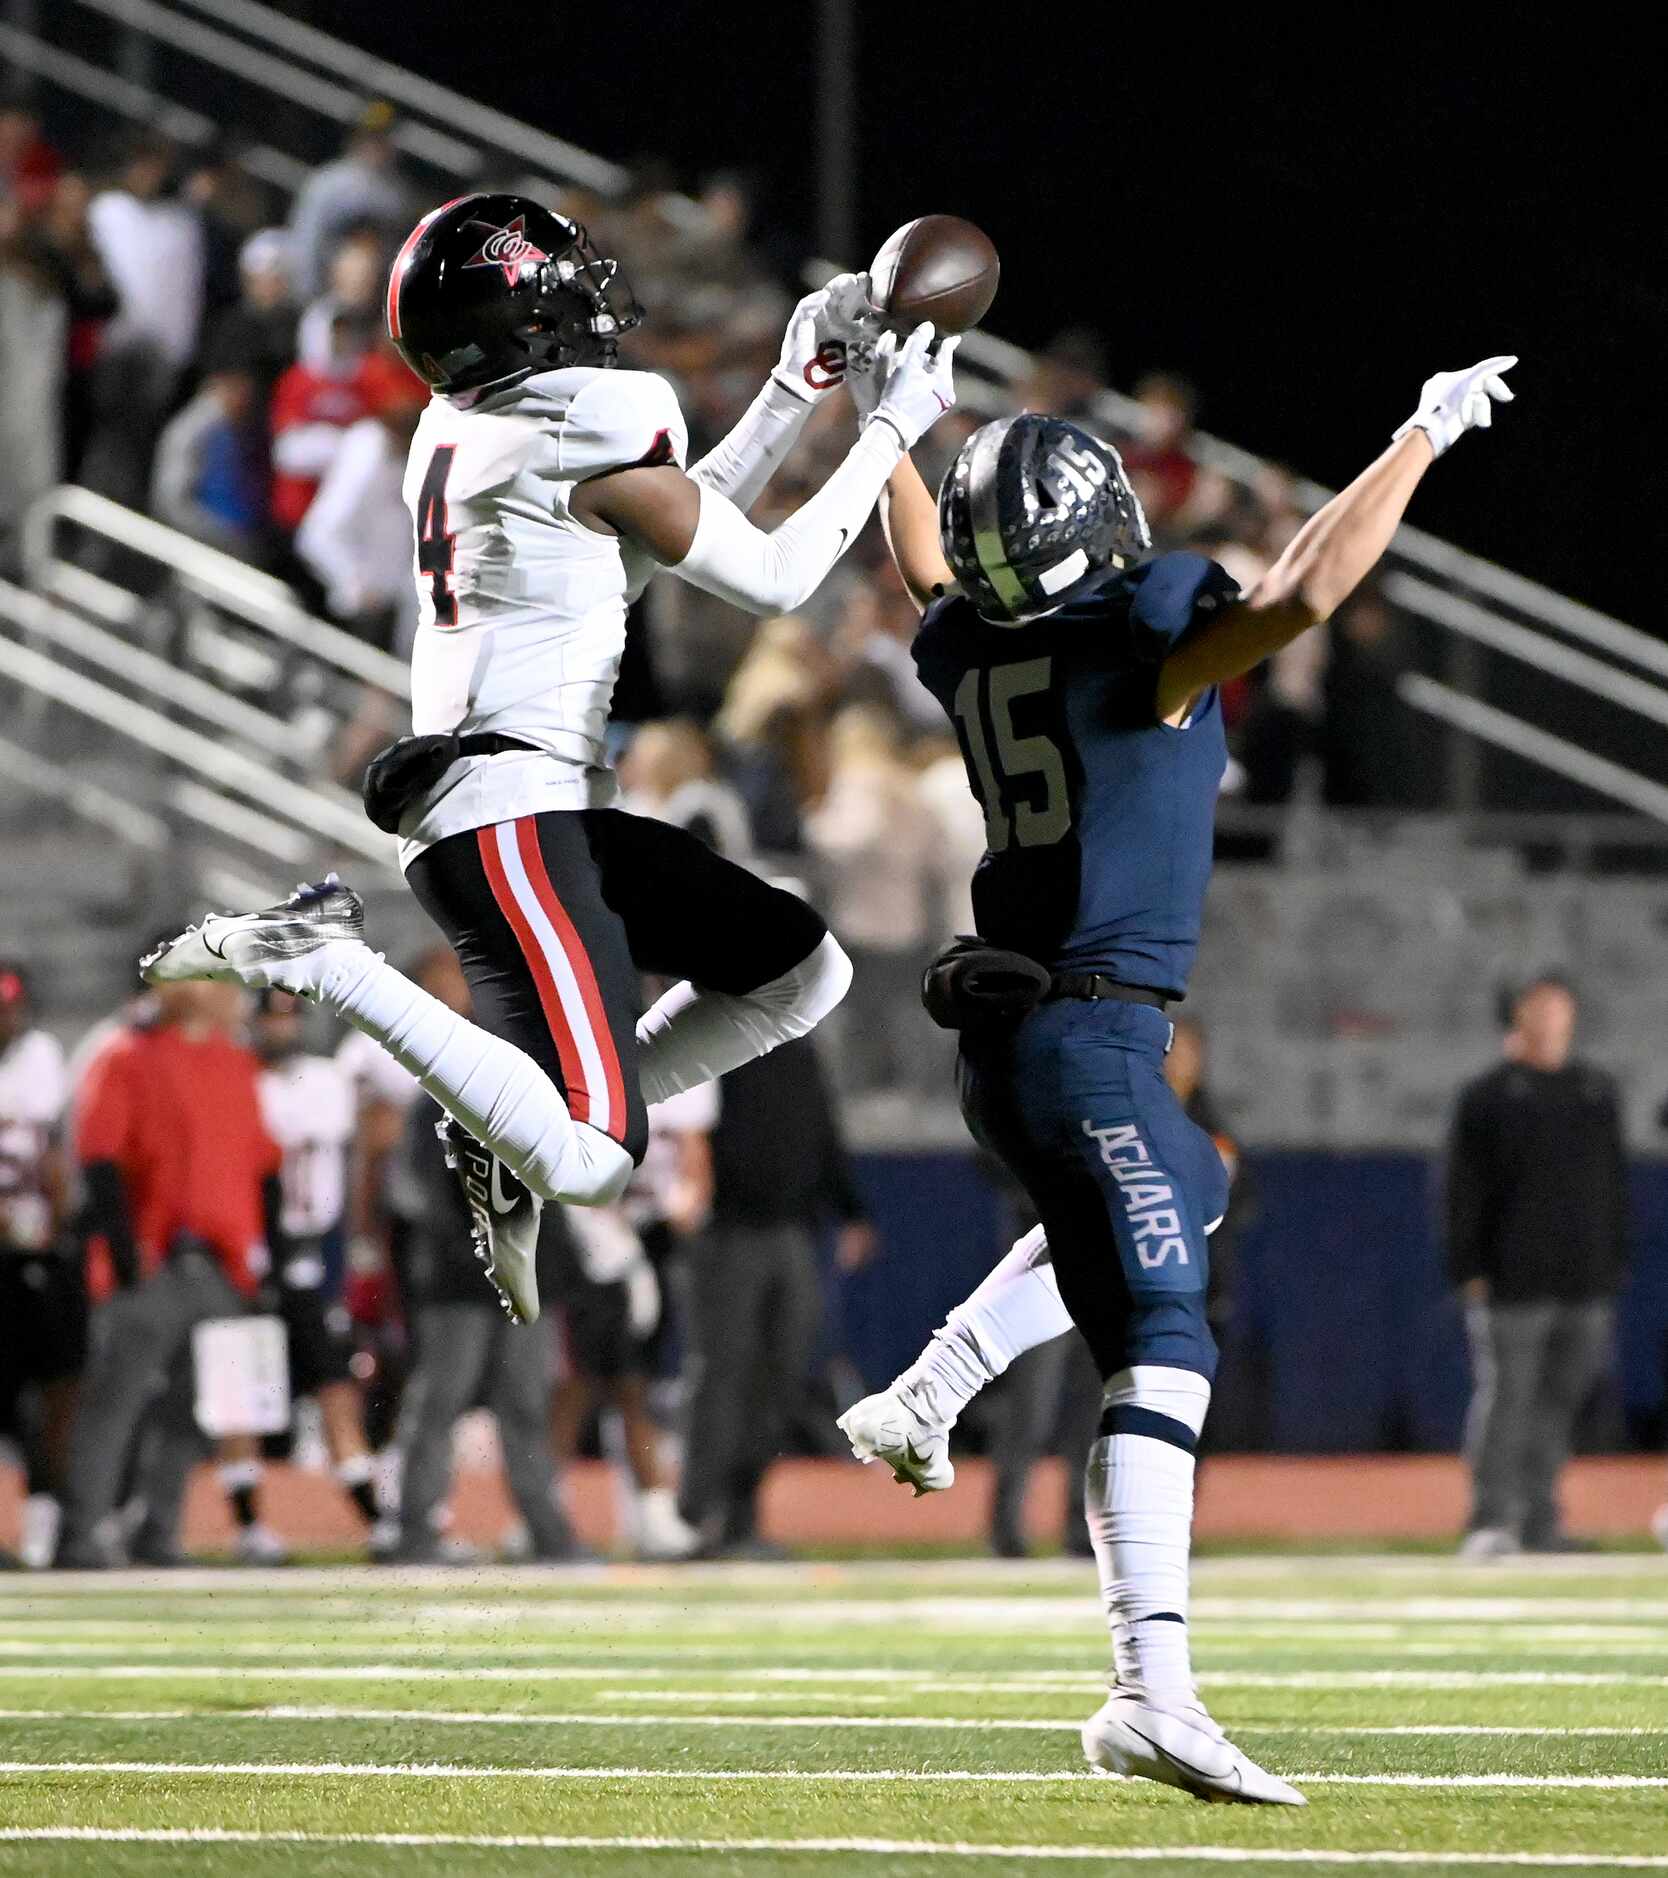 Coppell's Braxton Myers (4) breaks up a pass intended for Flower Mound's Walker Mulkey (15)...